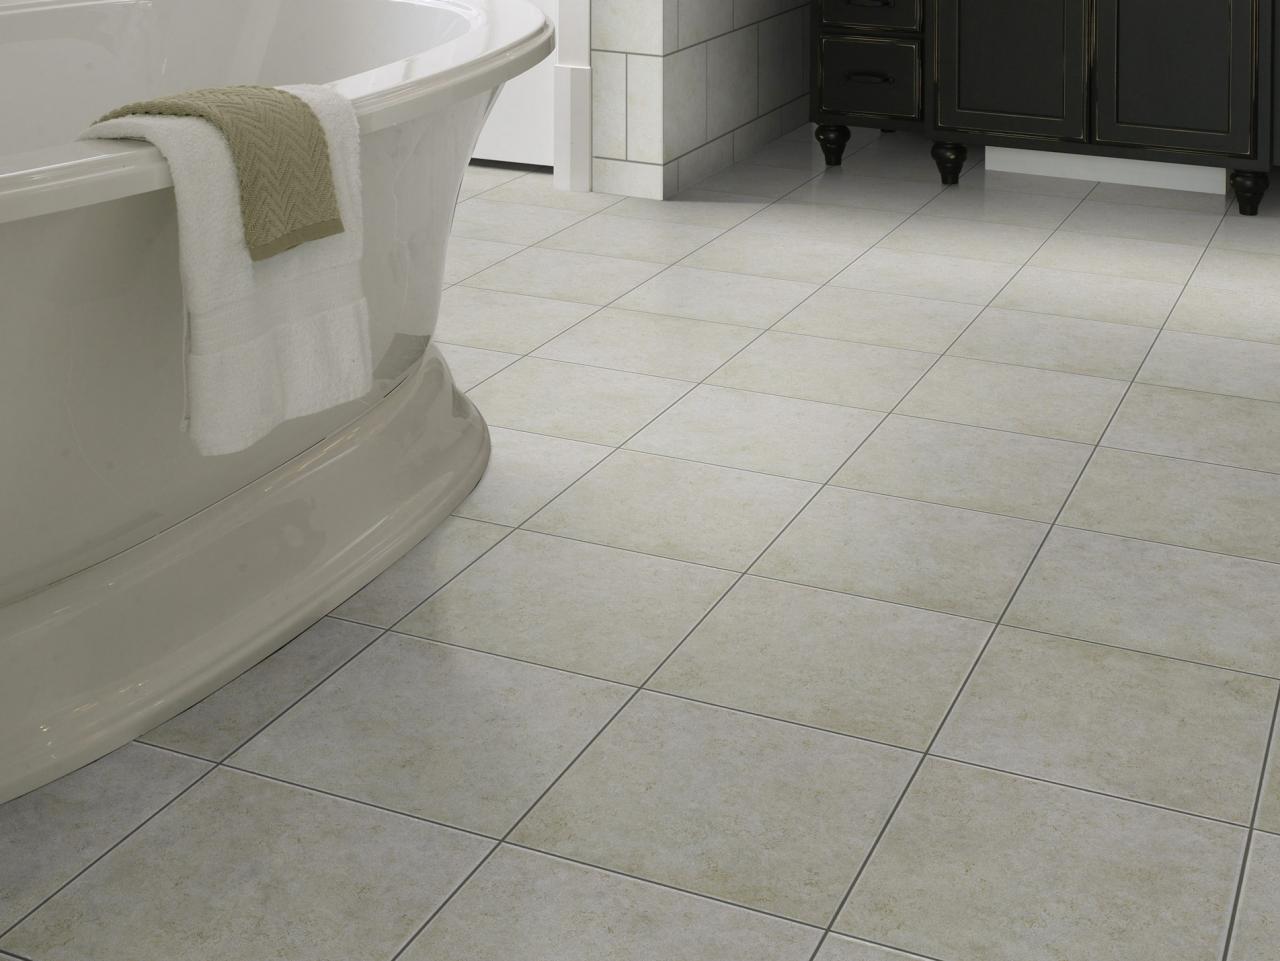 Why Homeowners Love Ceramic Tile, Pictures Of Tile Floors